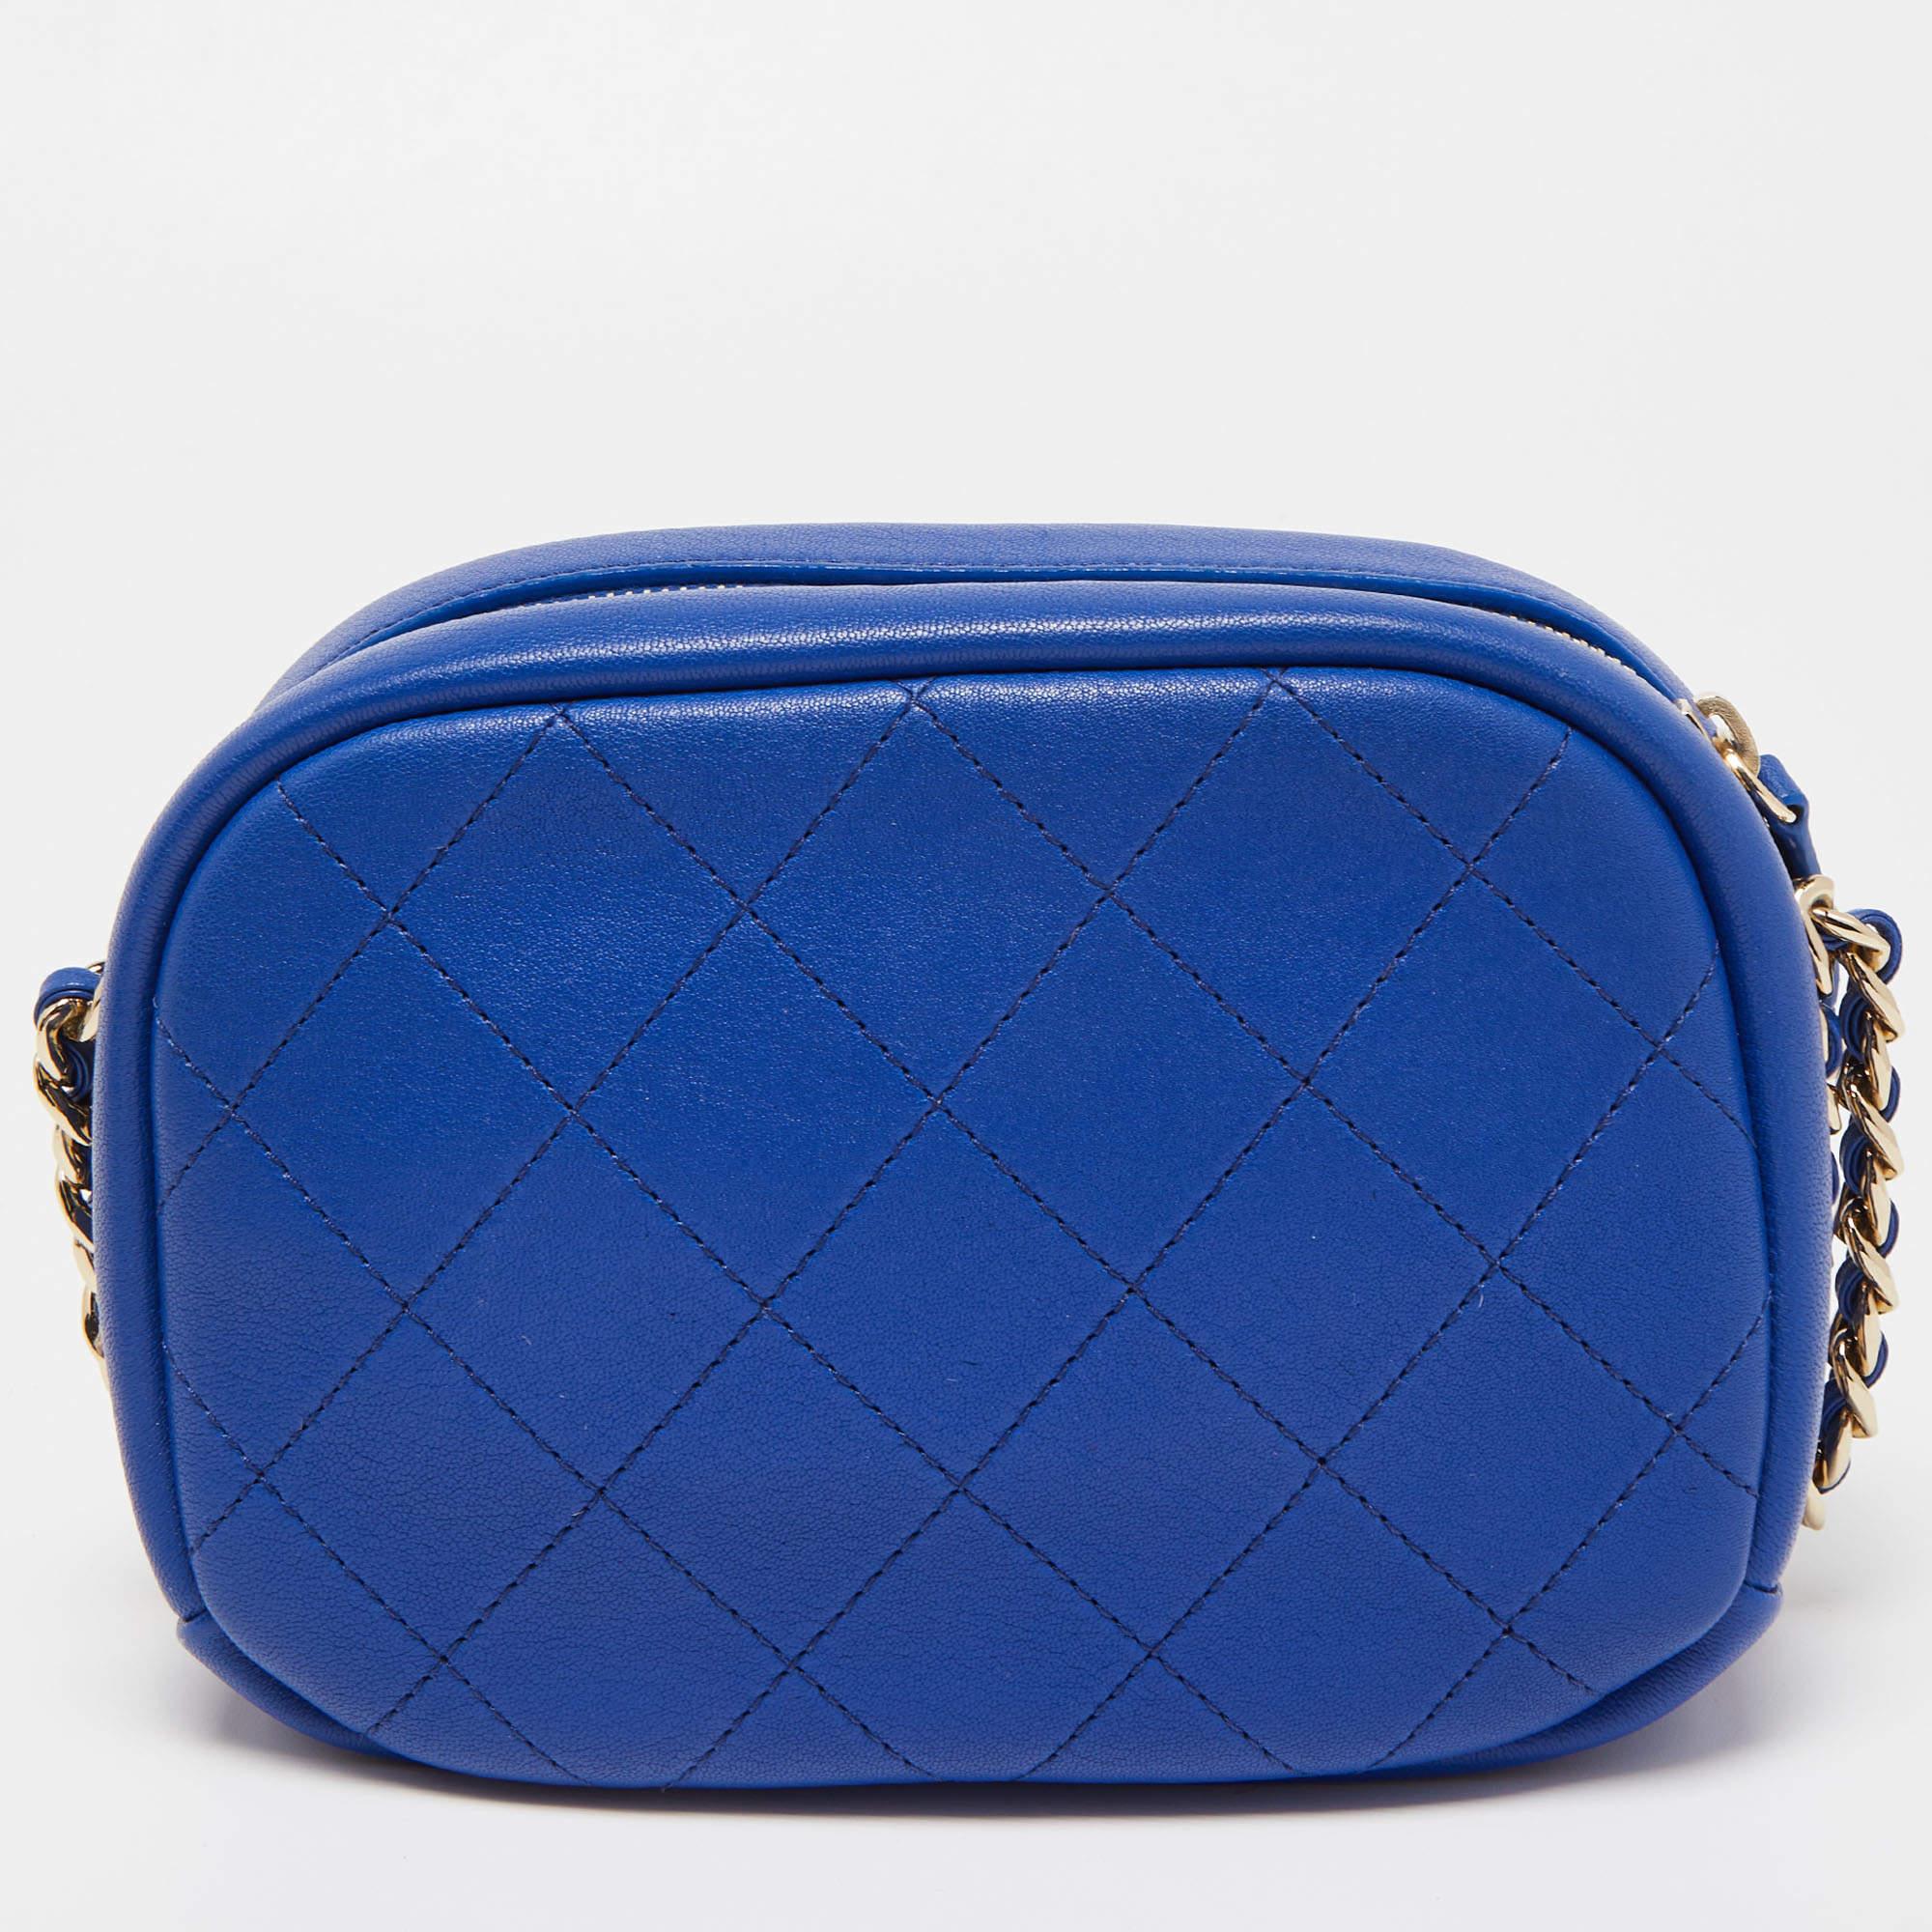 Chanel Blue Quilted Leather Small Casual Trip Camera Crossbody Bag For Sale 1